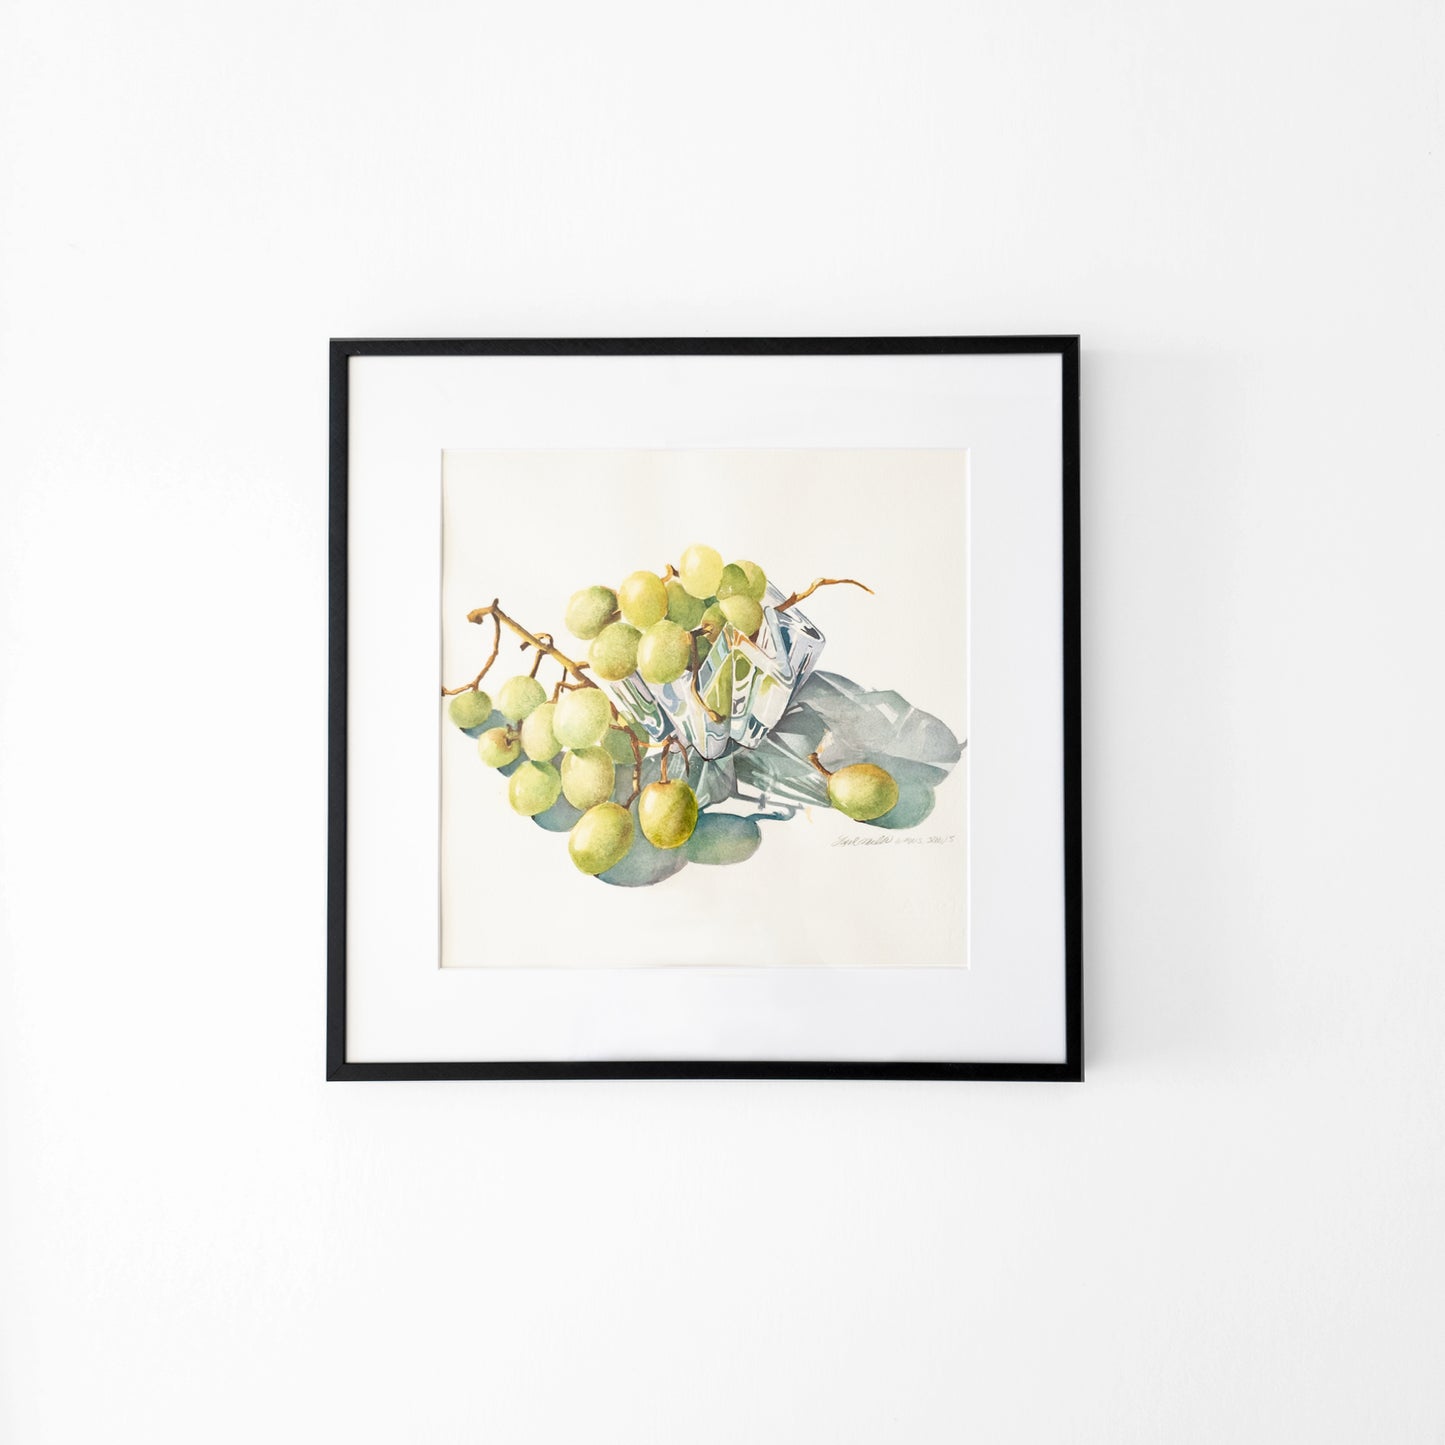 Watercolor painting of grapes in a crystal bowl in a back frame.